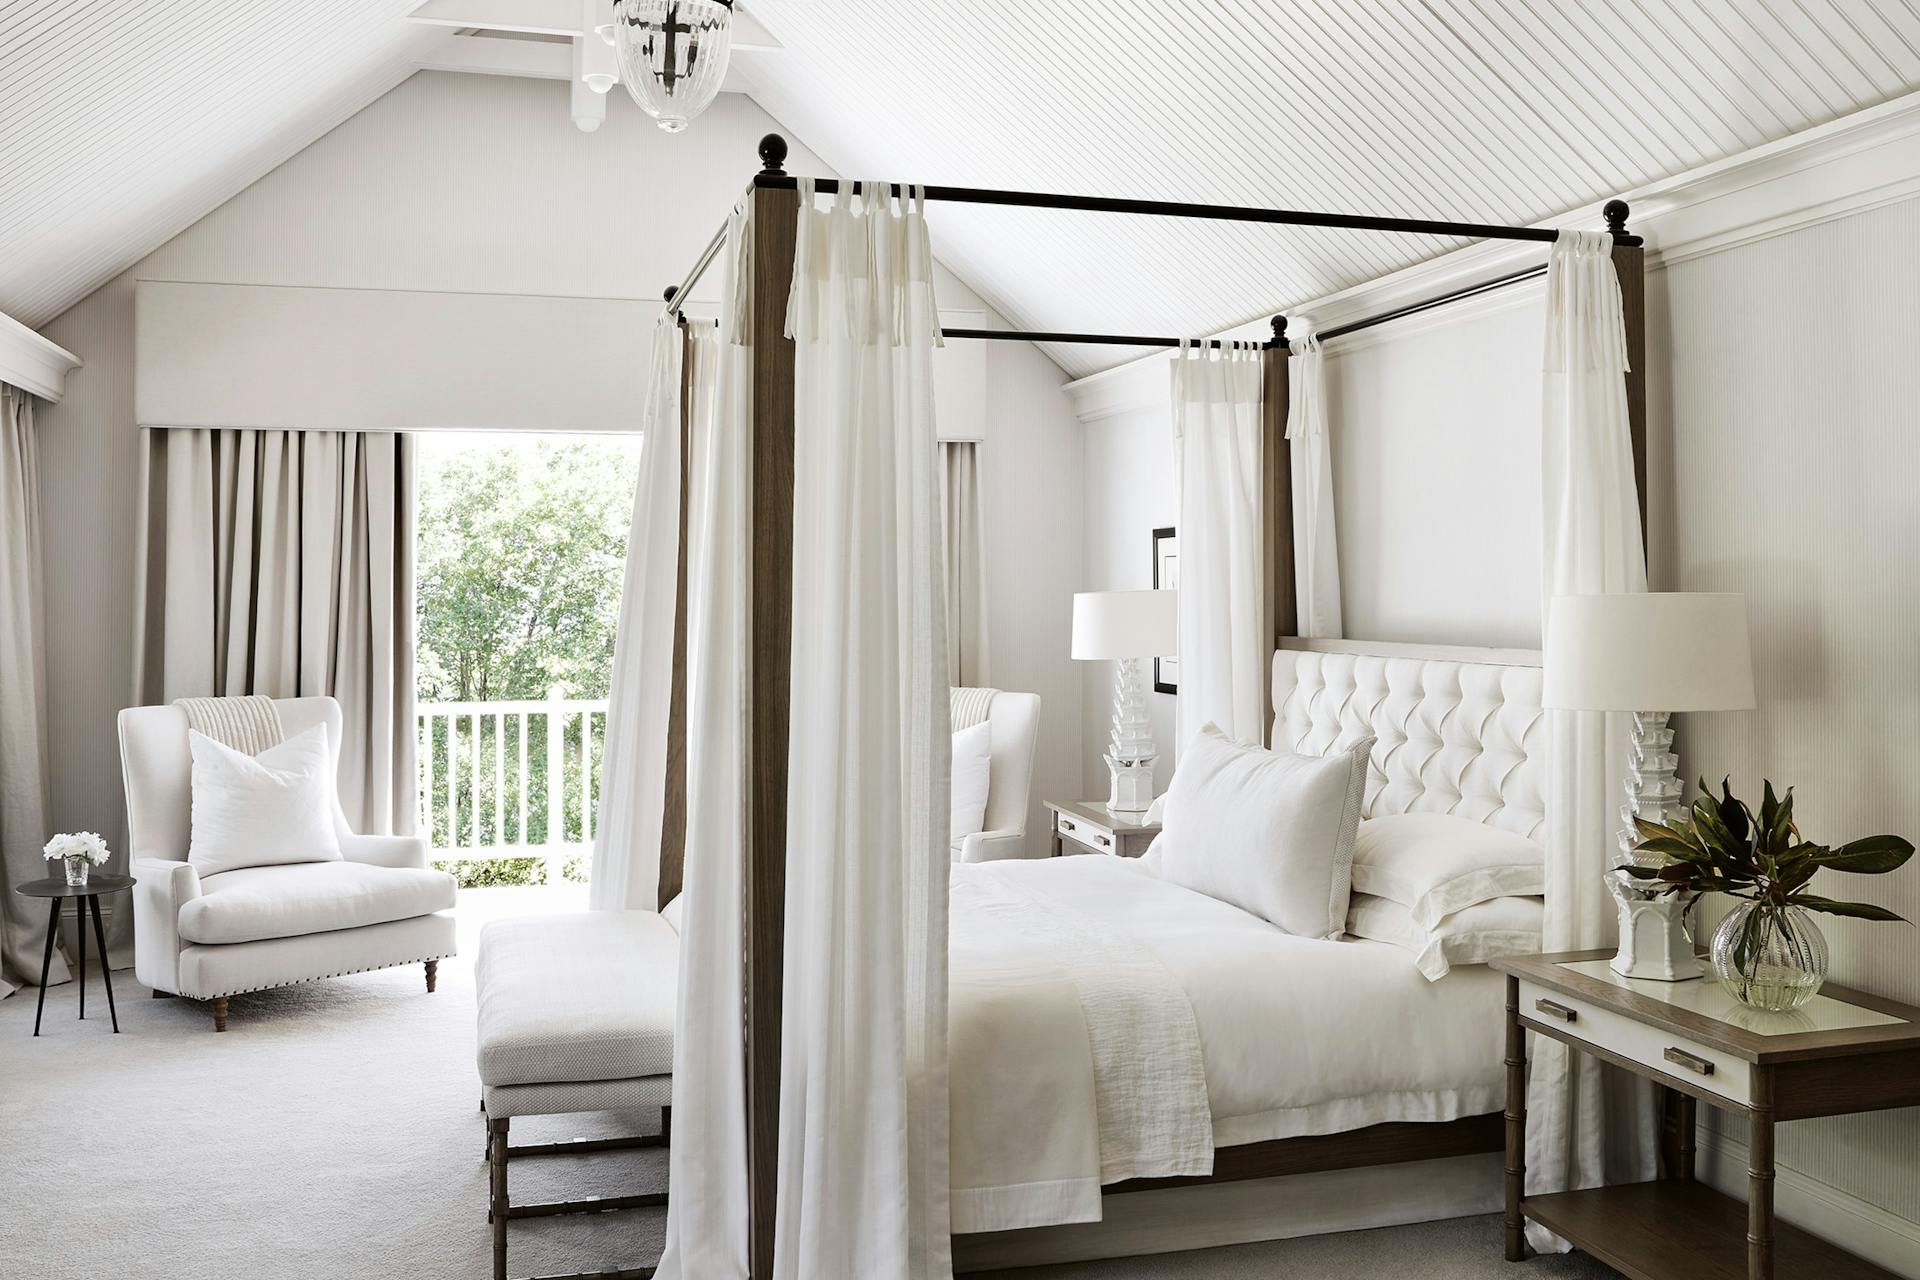 A four-poster bed, upholstered chair, bedroom bench and side table are seen in a bedroom with an A-frame ceiling, furnished in white, light neutrals and dark wood.